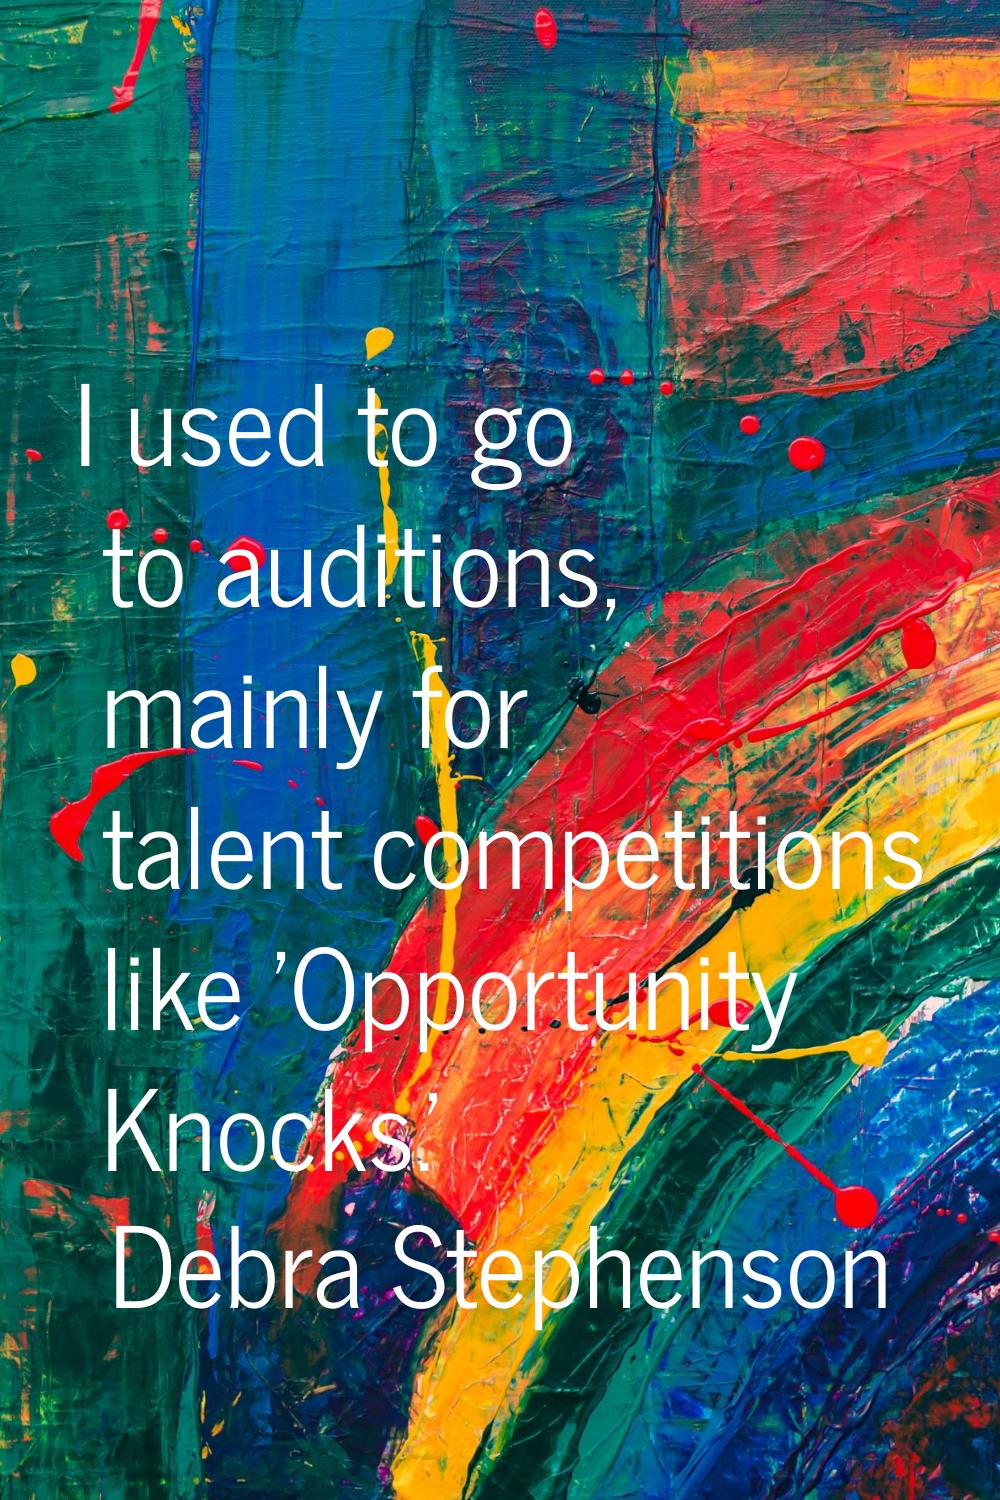 I used to go to auditions, mainly for talent competitions like 'Opportunity Knocks.'